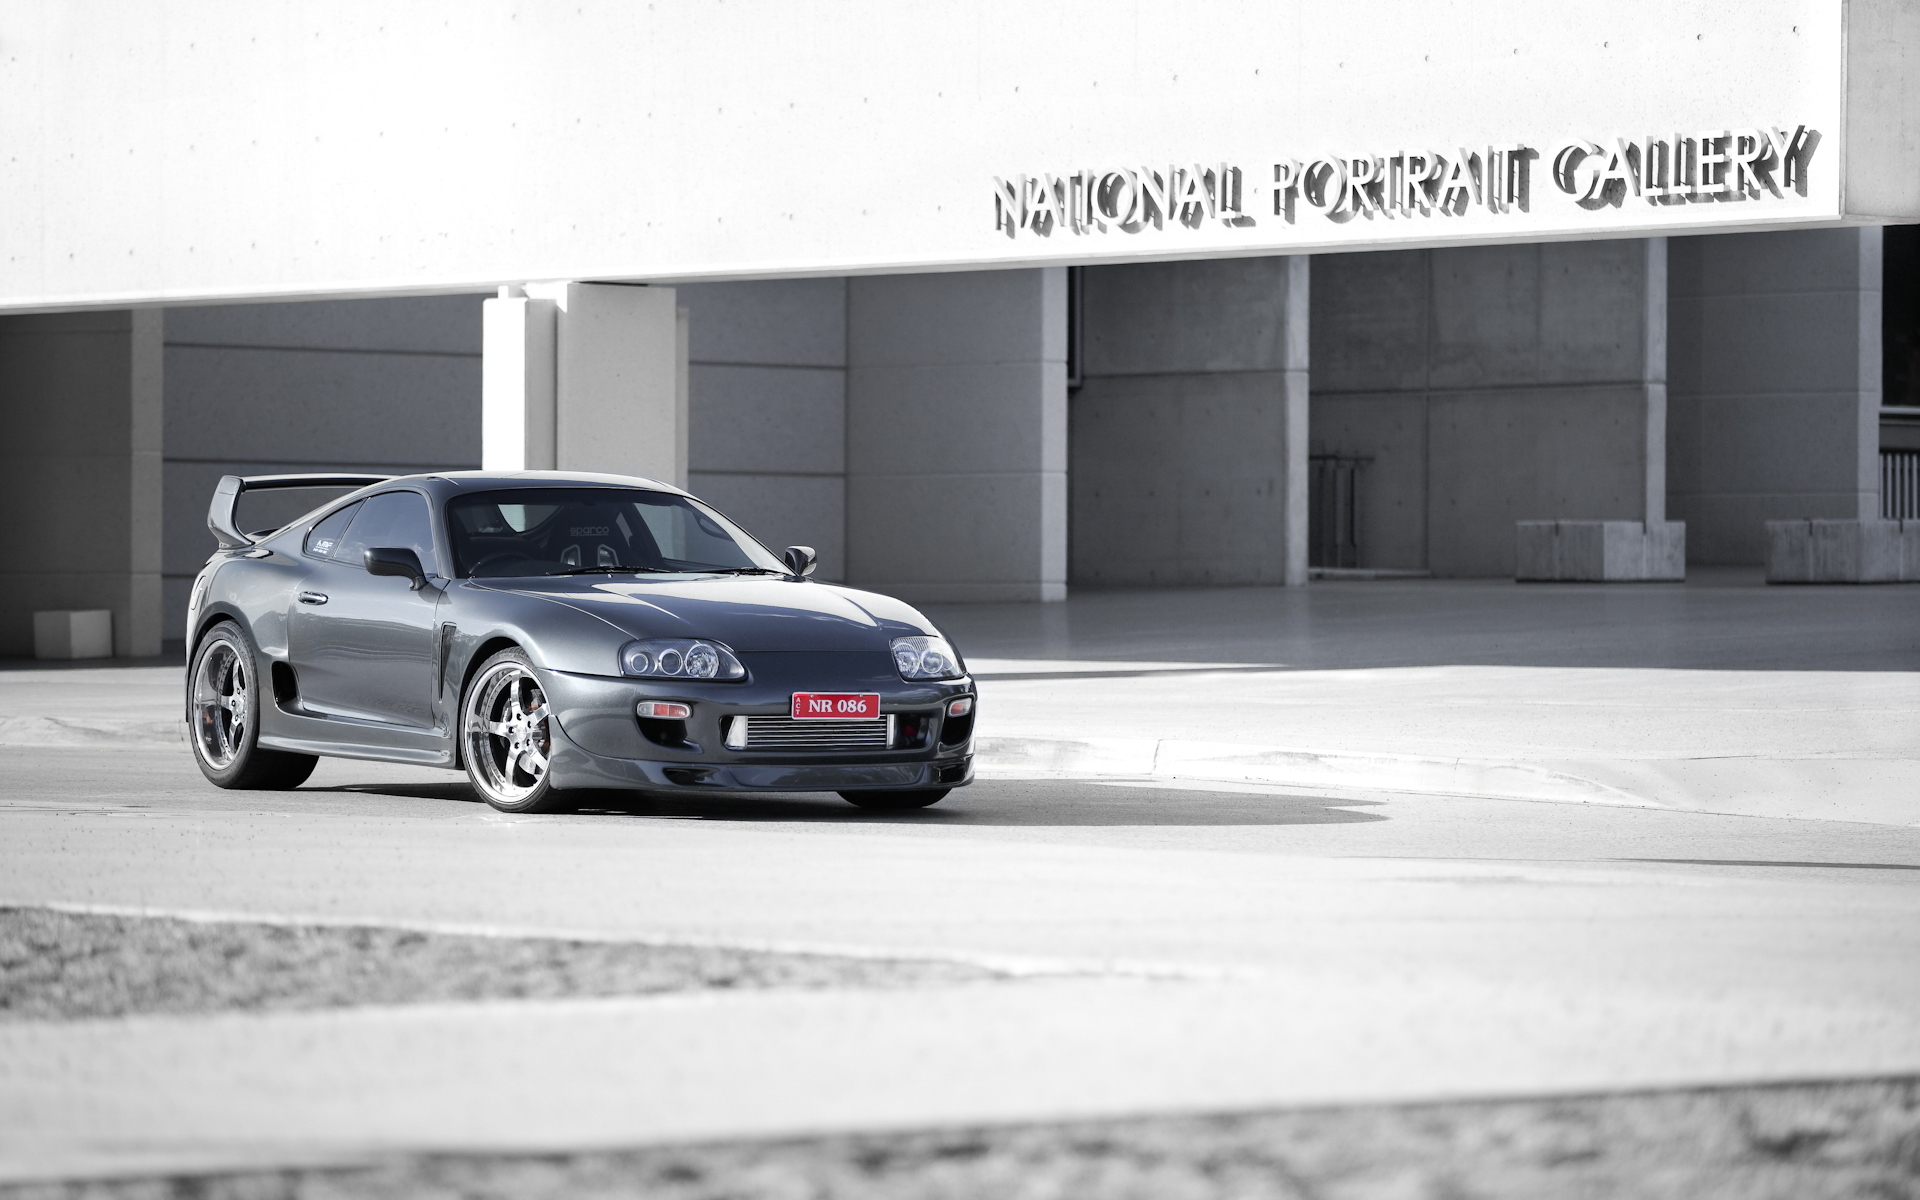 Wallpaper Toyota Supra Tuning Car Pictures And Photos